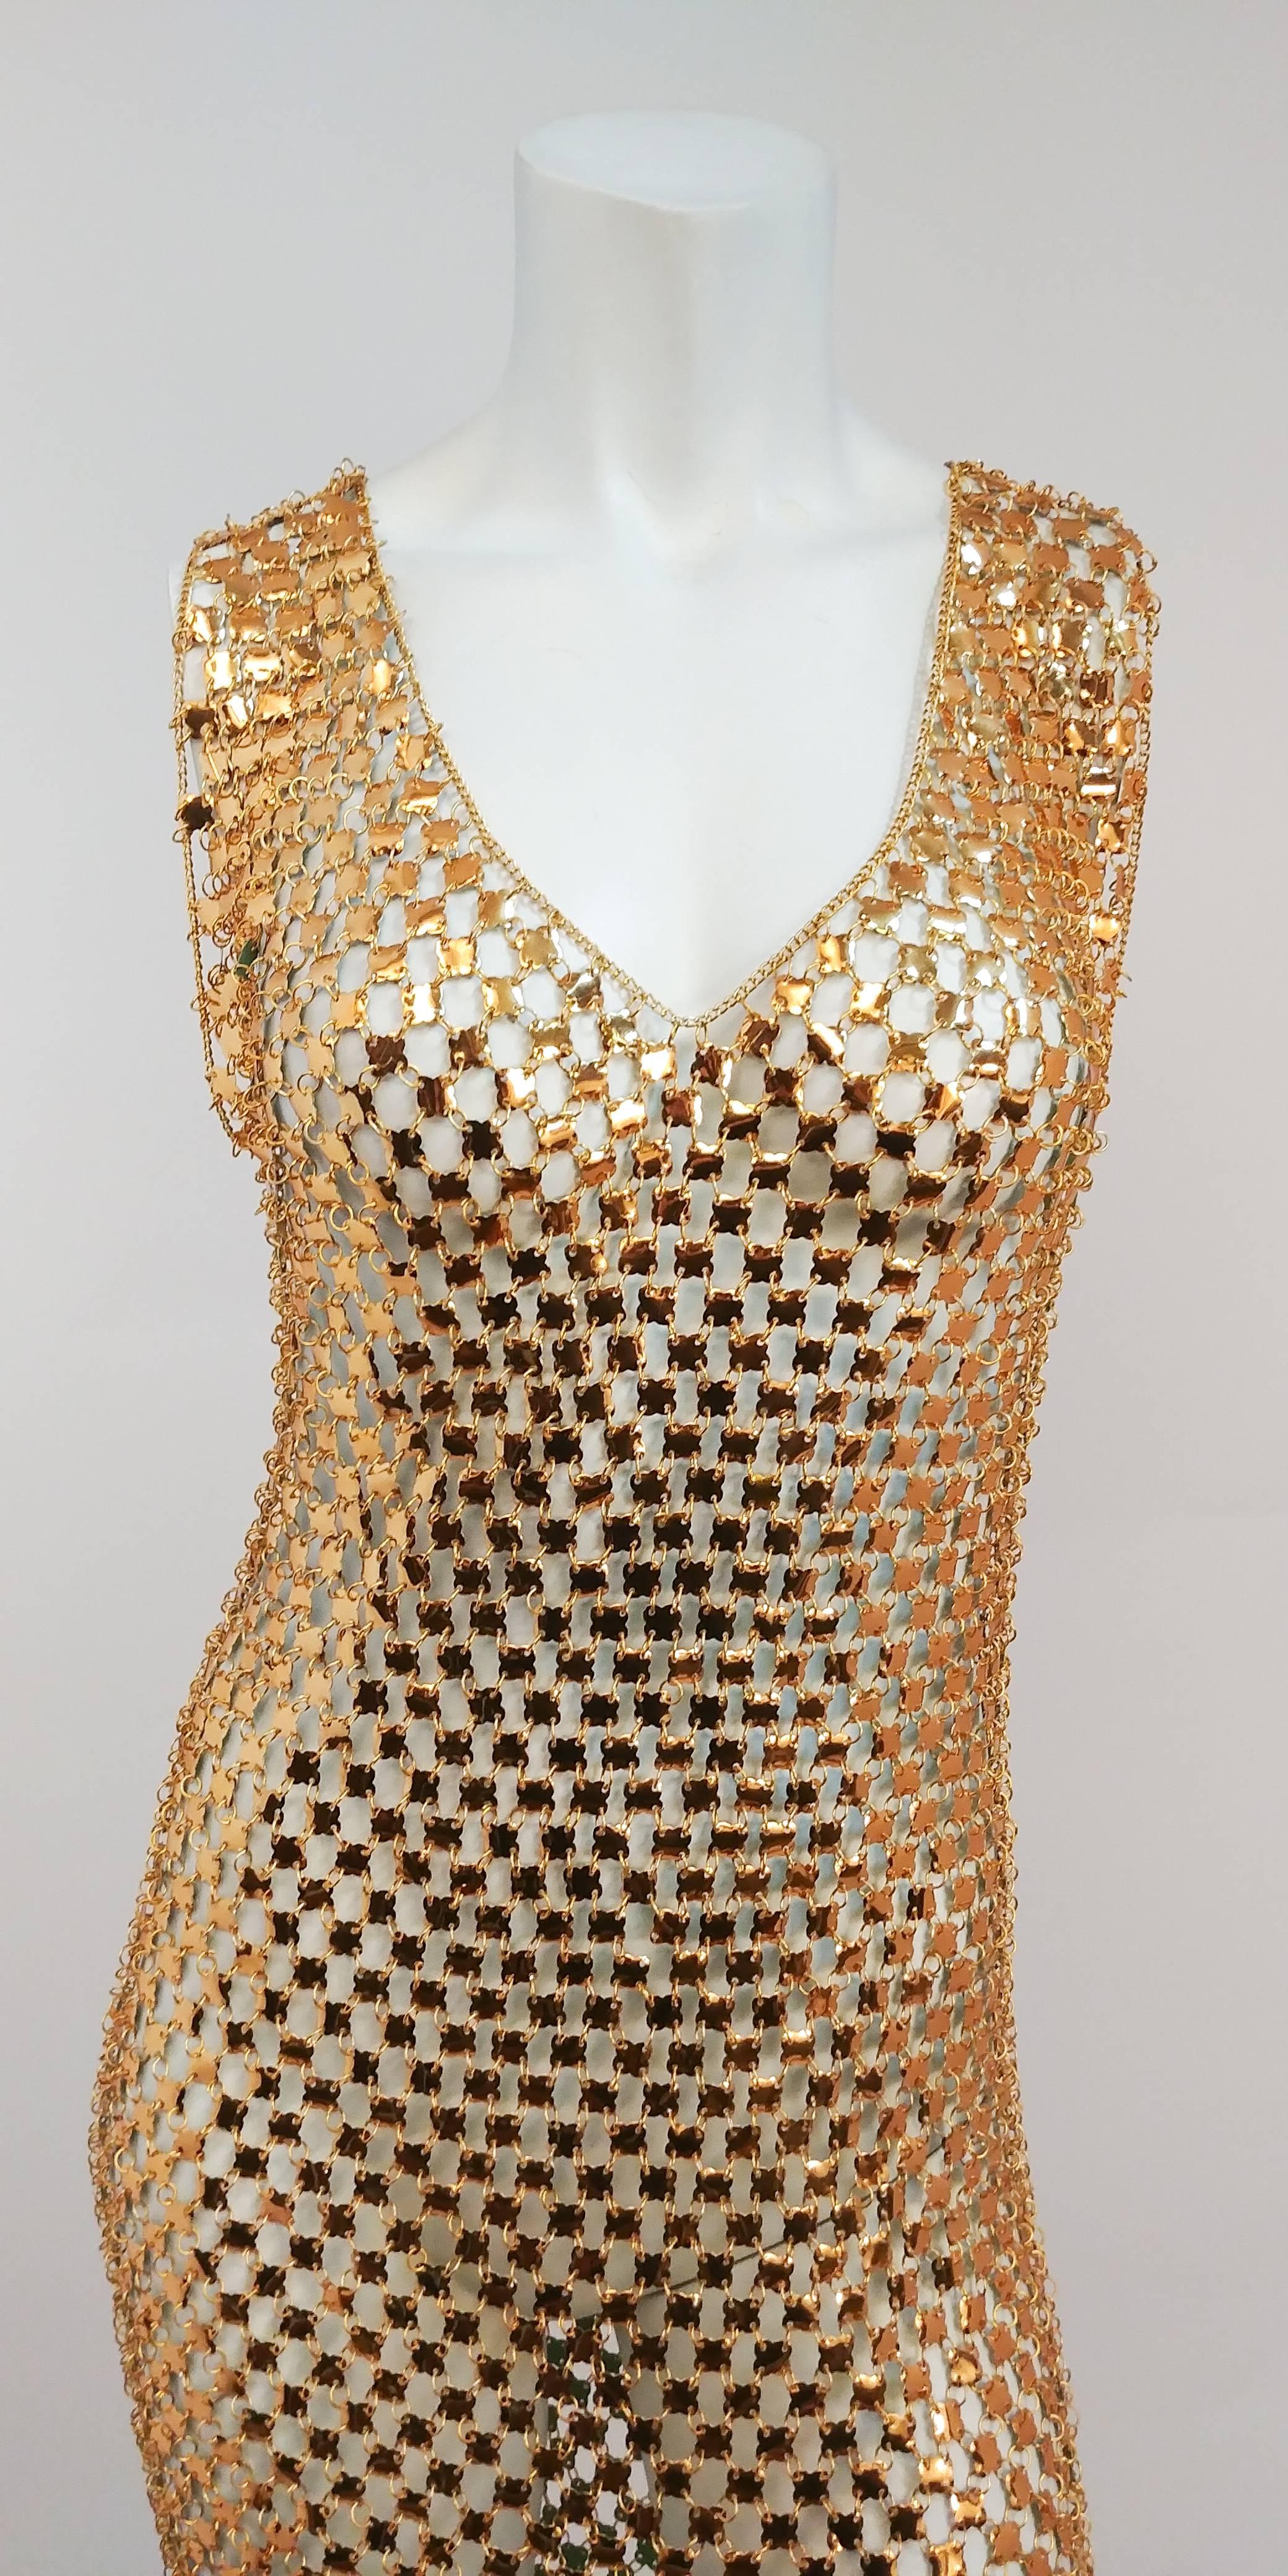 1970s Paco Rabanne Chain Link Dress. Slips on over head, no closures. 